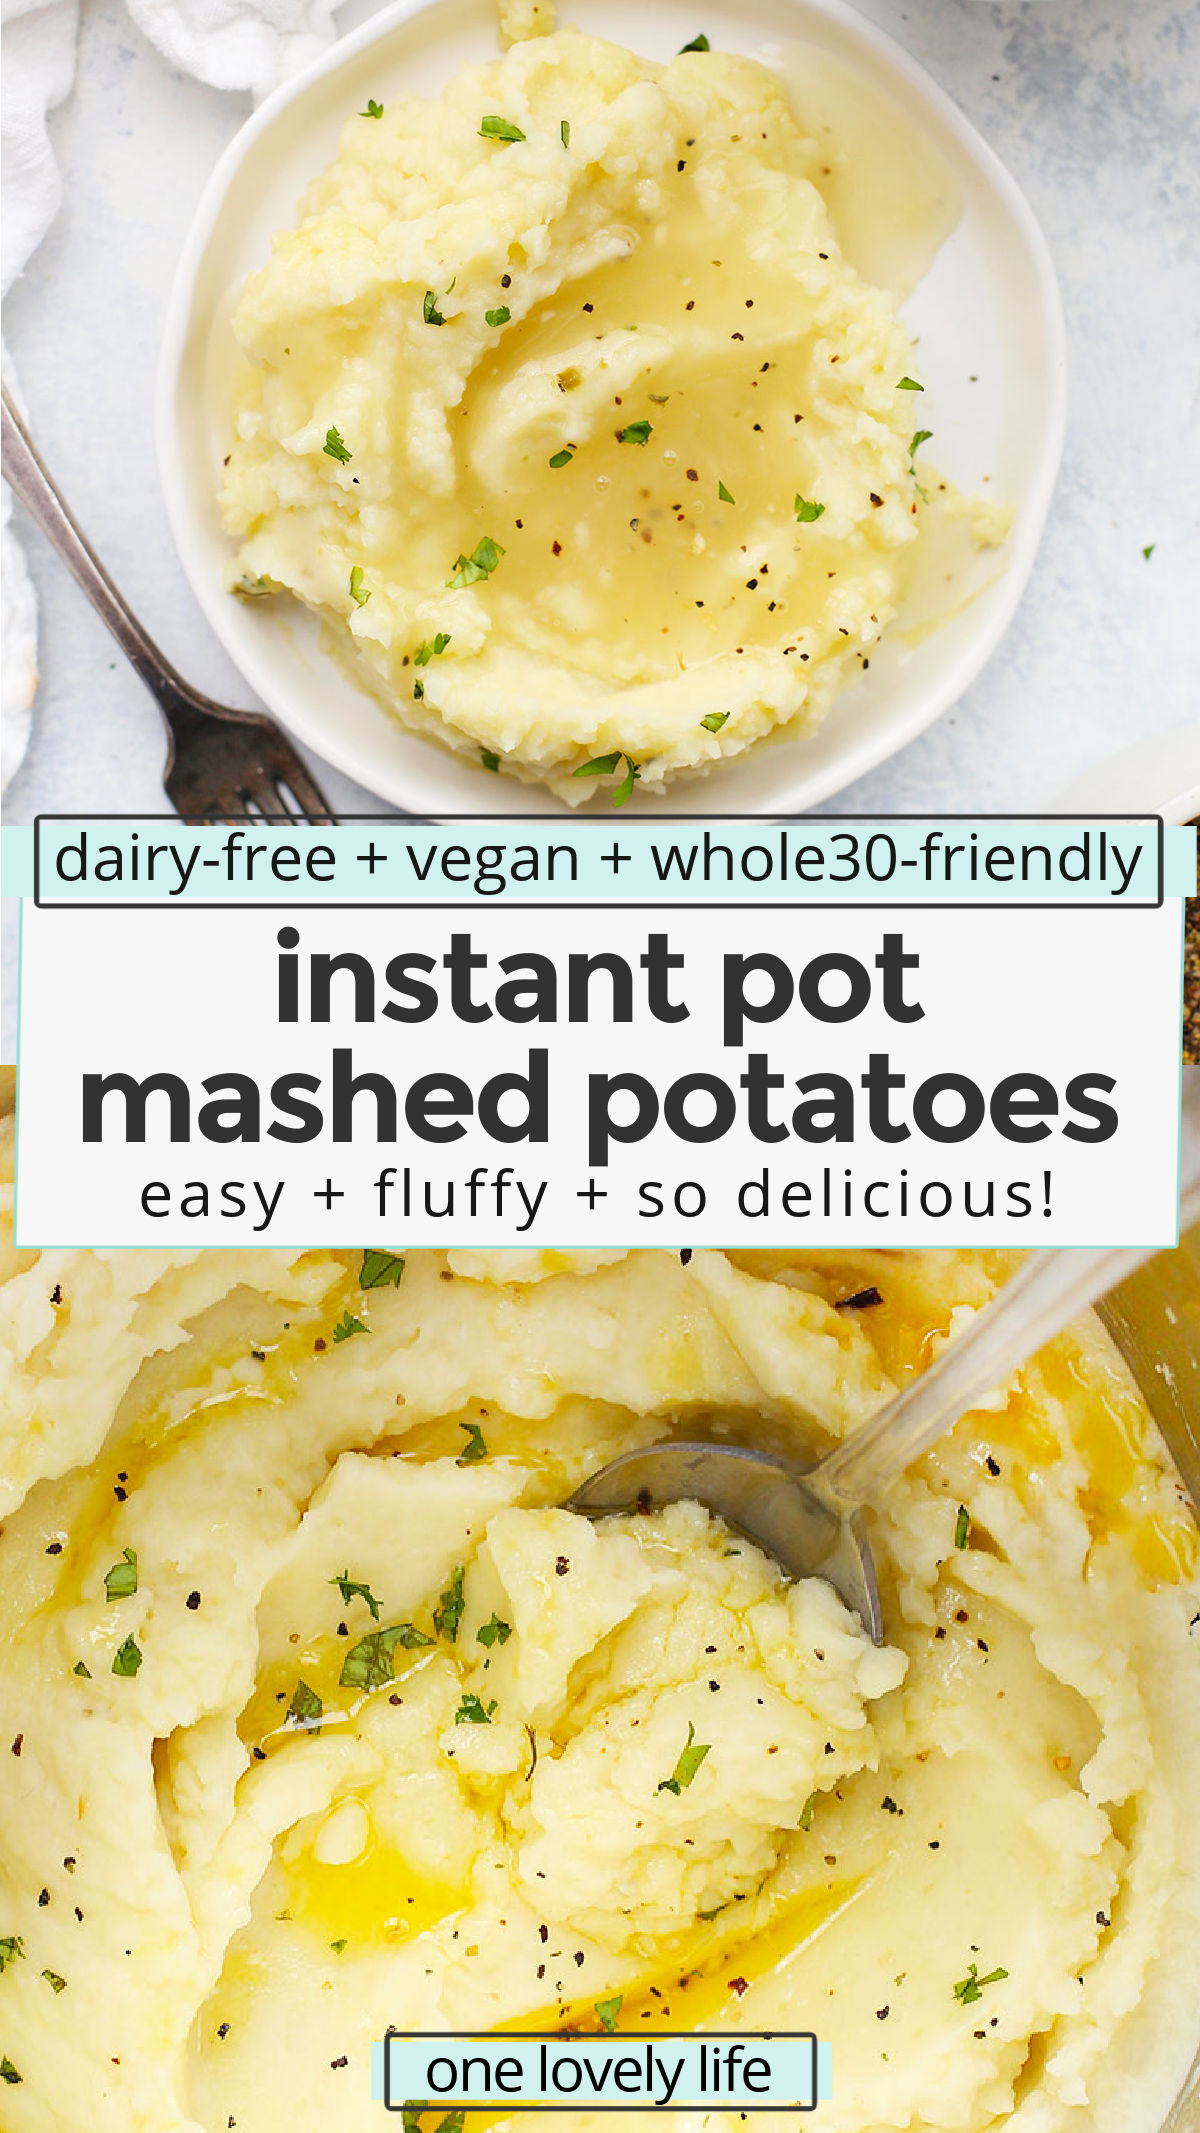 Instant Pot Mashed Potatoes - These creamy, fluffy mashed potatoes are so easy, thanks to the pressure cooker! They're the perfect accompaniment to a hearty home-cooked meal! (Gluten-free, dairy-free, vegan + Whole30 options!) / instant pot vegan mashed potatoes / instant pot dairy free mashed potatoes // instant pot whole30 mashed potatoes / Pressure cooker mashed potatoes / dairy free mashed potatoes /